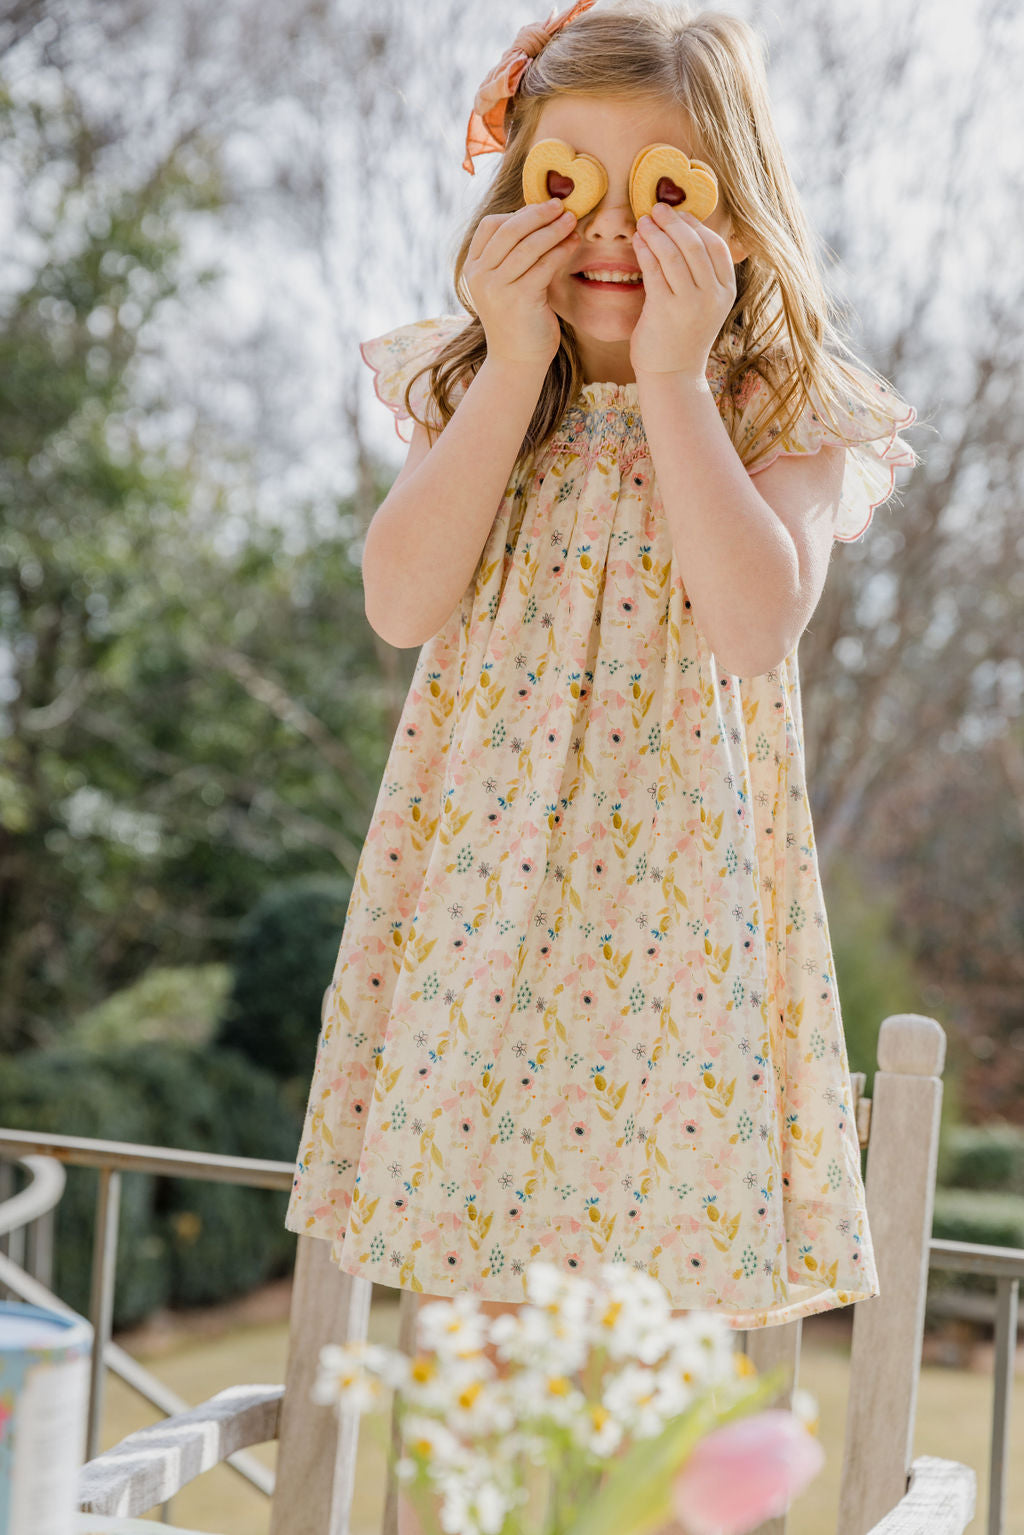 Daisy Dress in Dancing Floral